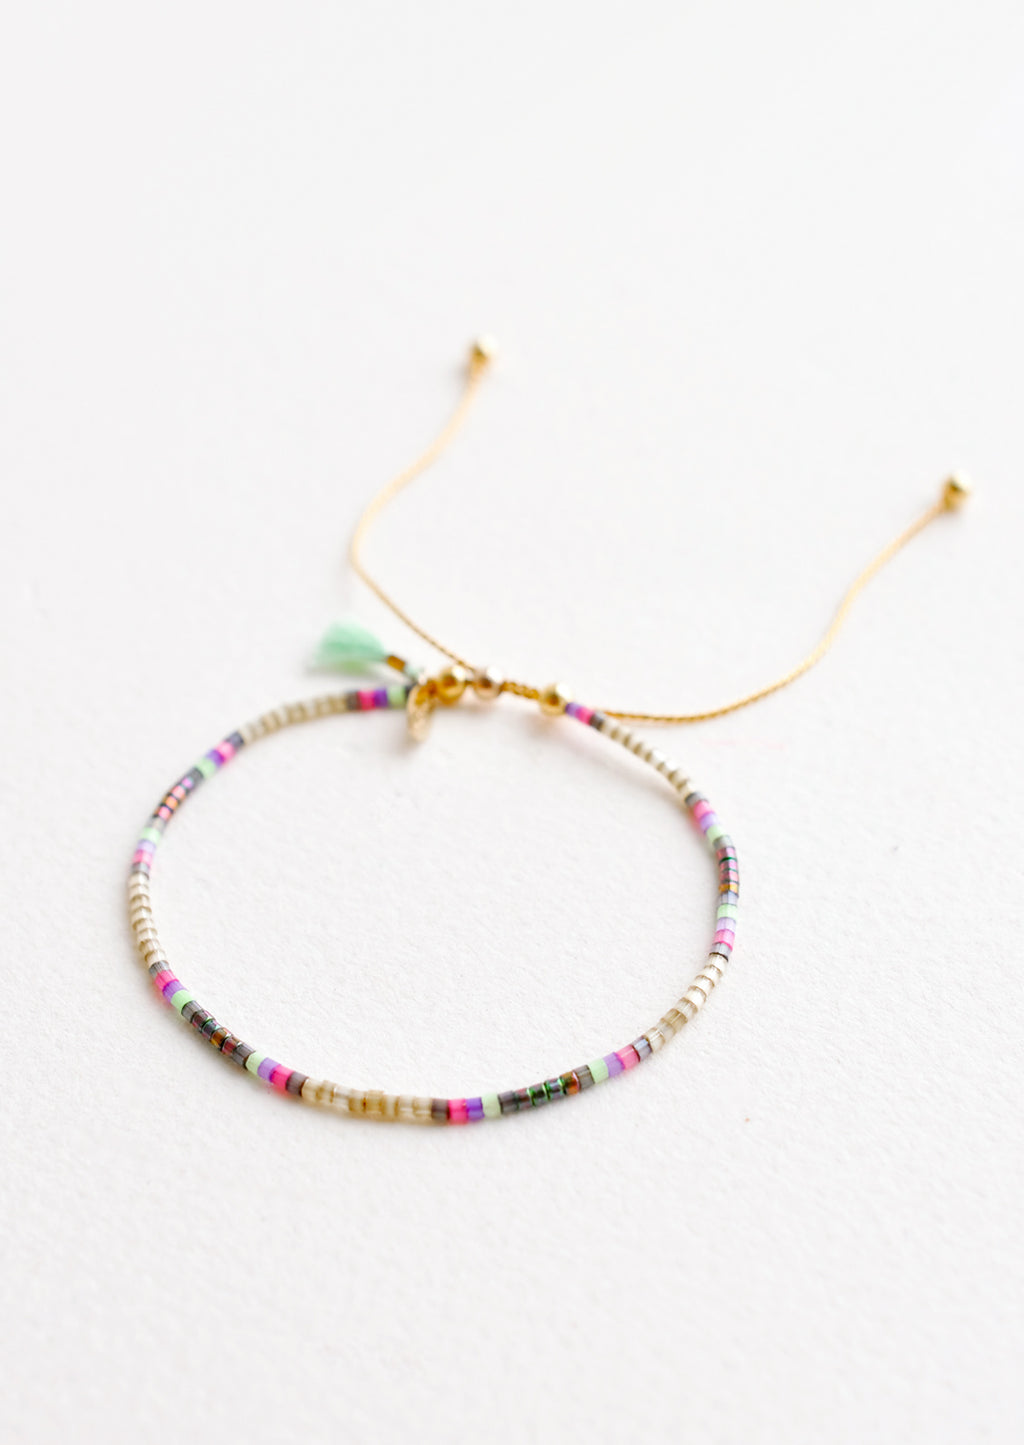 Oyster / Olive / Pink: Delicate bracelet of gray glass beads with regularly spaced sections of pink and green beads on a thin gold chain.